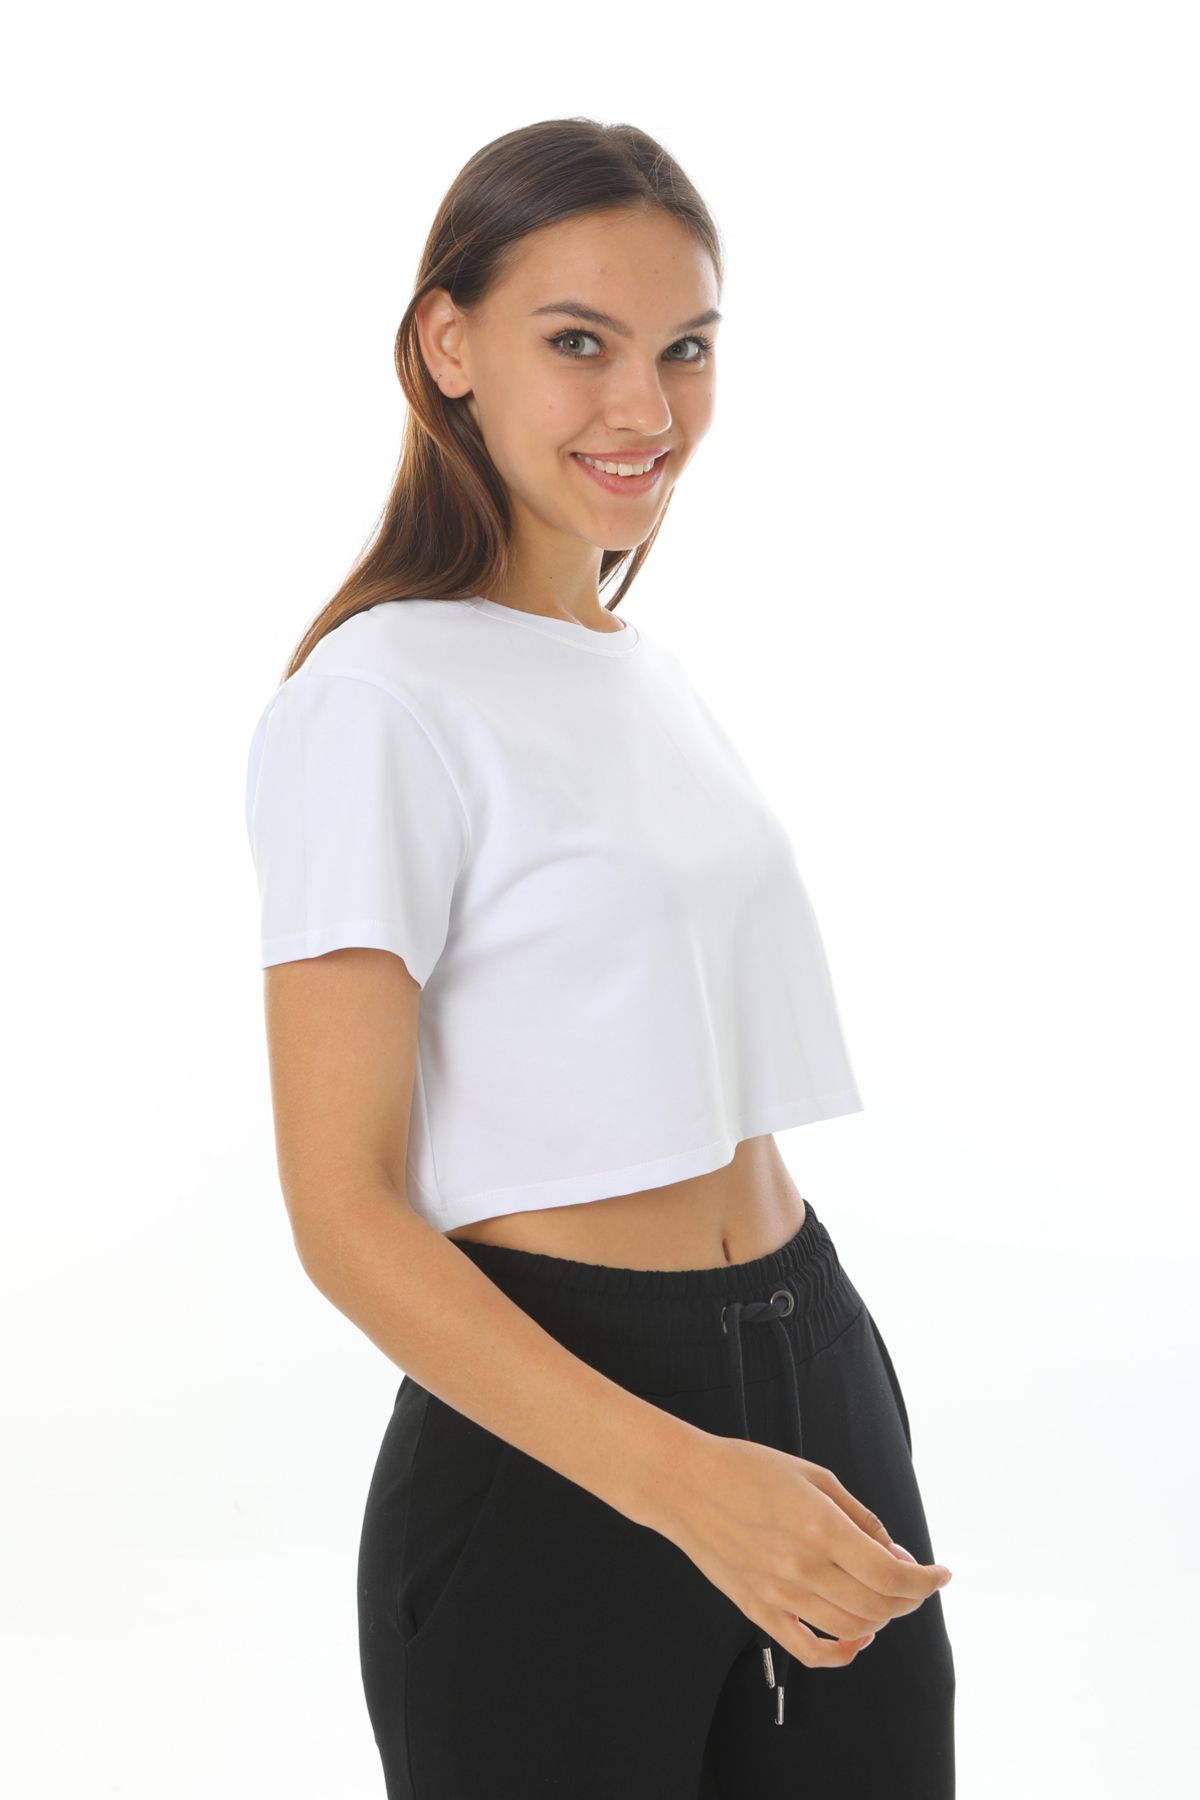 Cool Hip Hop Style Cotton Crop Top For Girls Streetwear Trendyol Clothing  For Teens 4 16 Years From Jiao08, $19.92